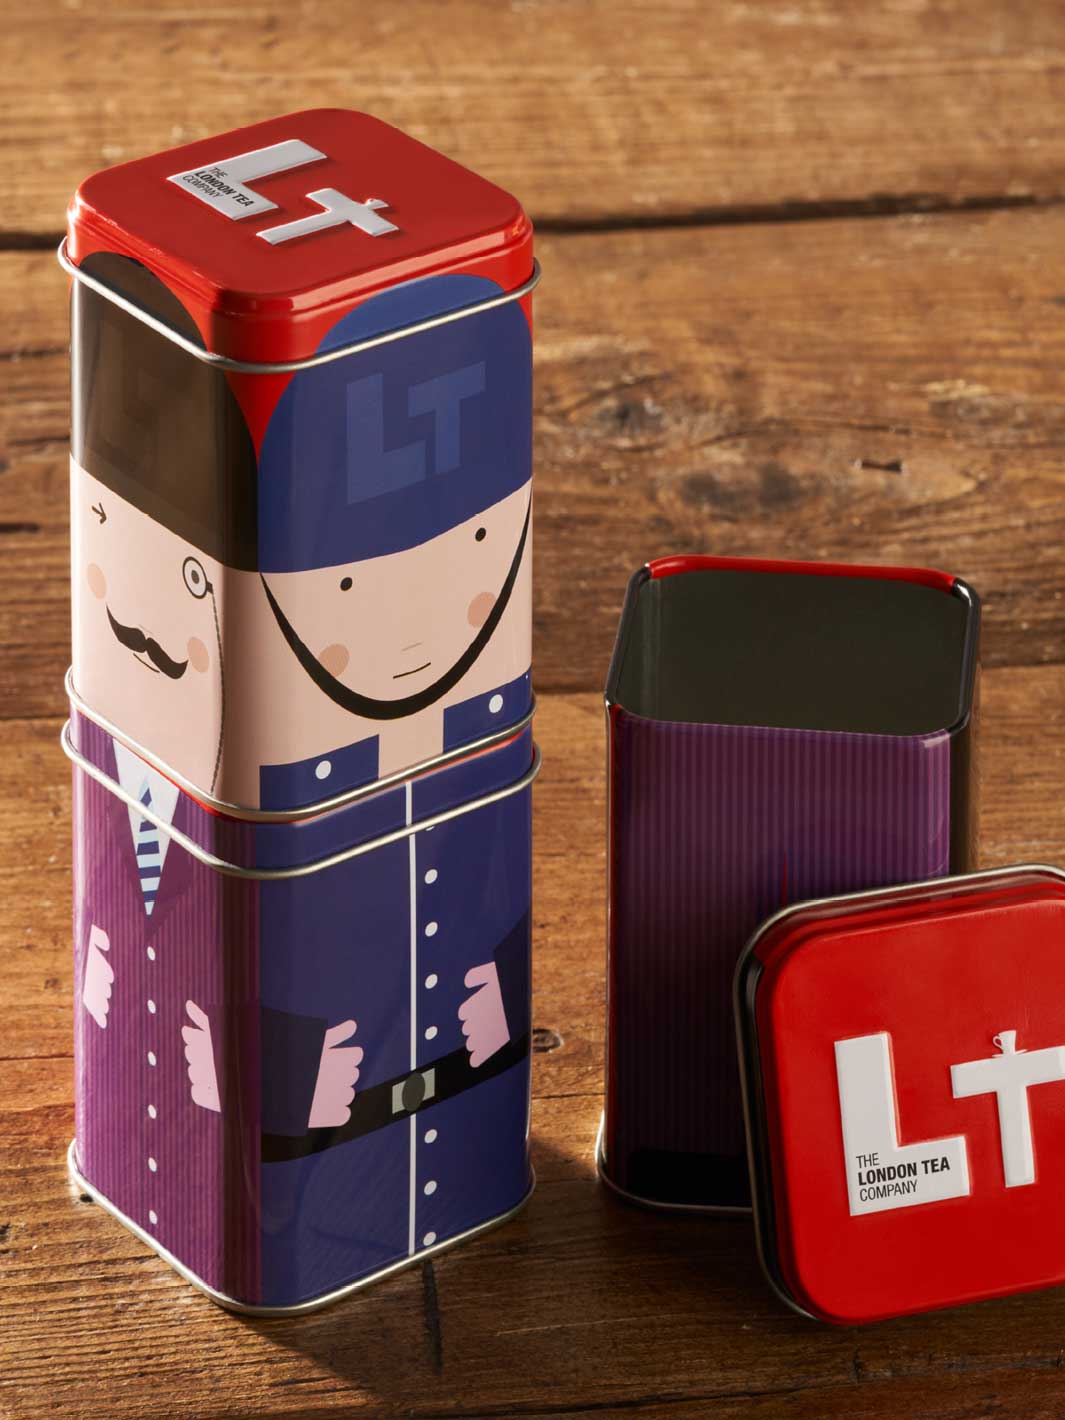 Bespoke tin packaging that stacks. There are three tins ins total each with a different part of a person and when stacked they make a whole person.